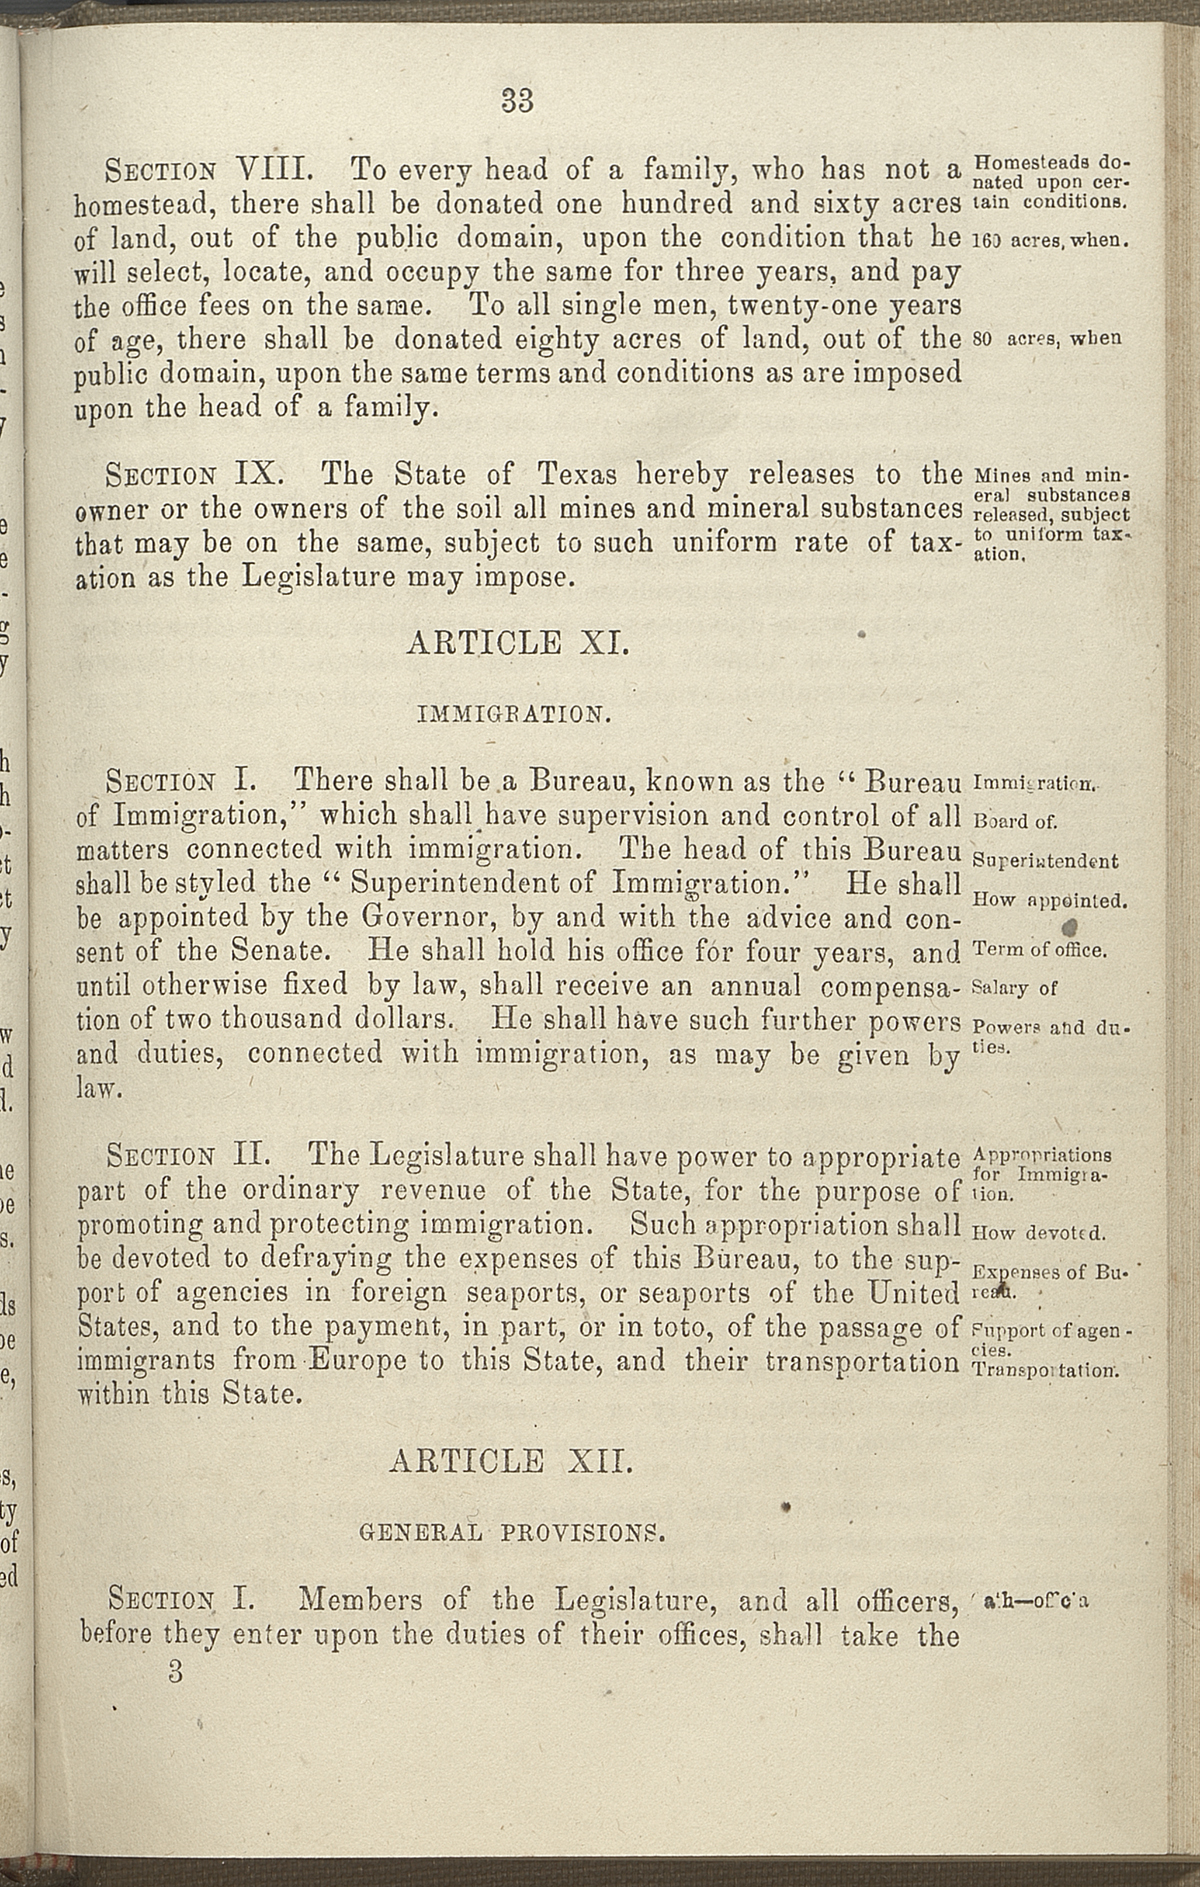 Article XII, Section I